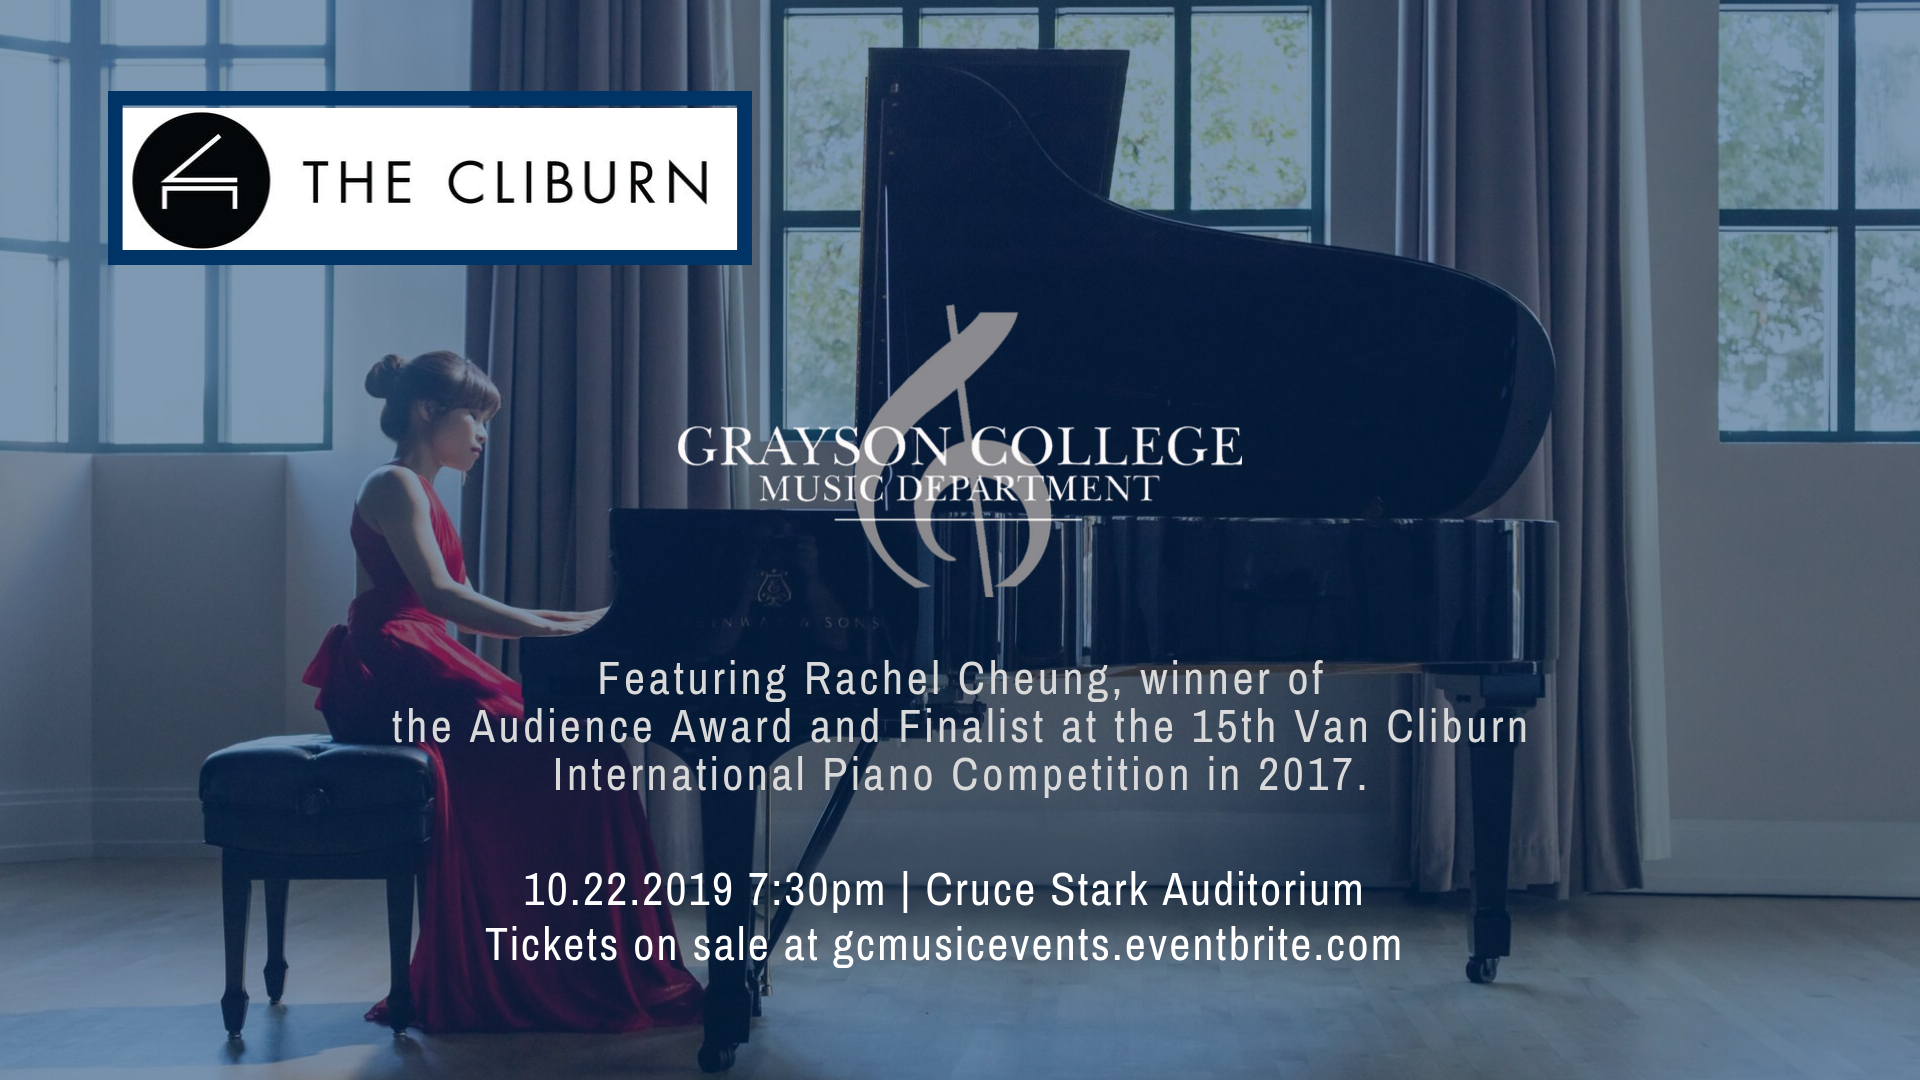 The Cliburn concert featuring rachel cheung, winner of the audience award and finalist at the 15th van cliburn international piano competition in 2017. 10/22/2019 7:30pm in the Cruce Stark Auditorium. Tickets on sale at gcmusicevents.eventbrite.com